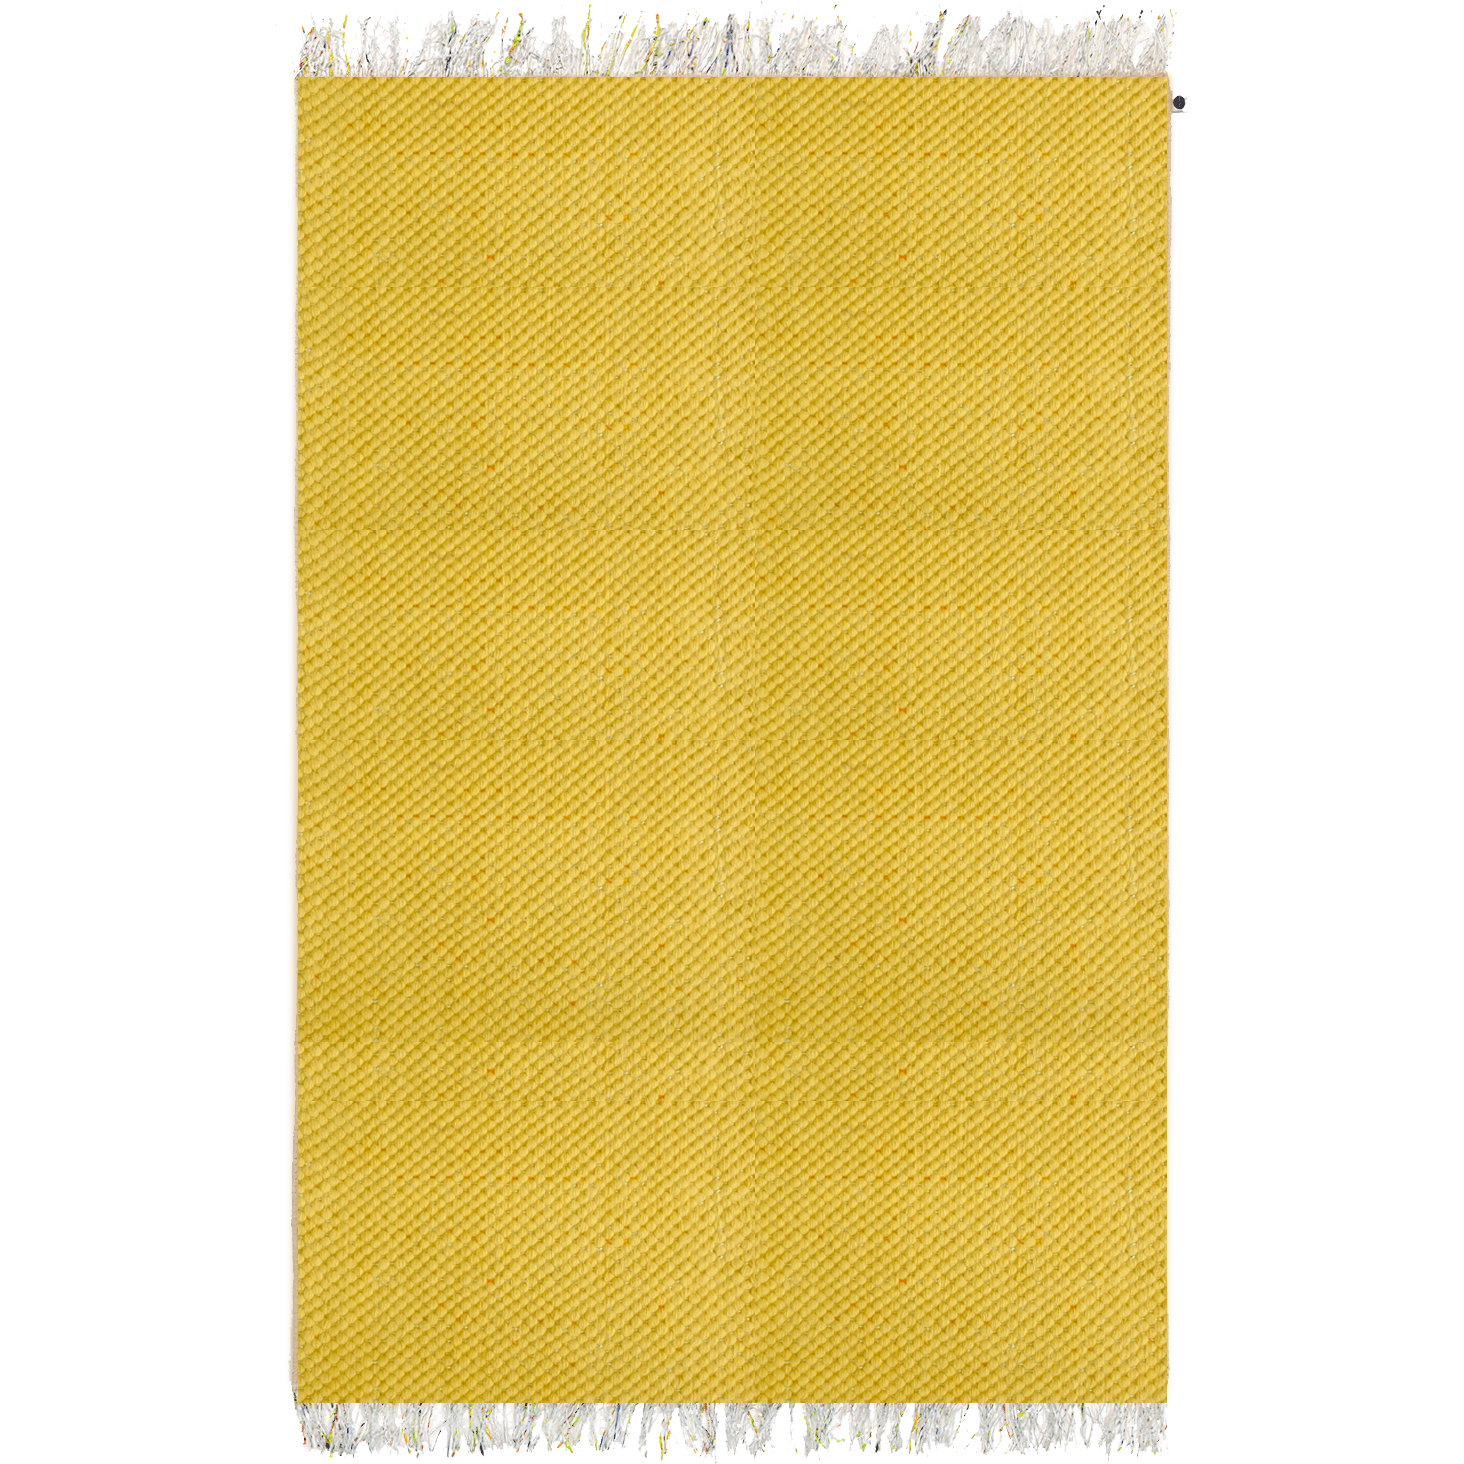 files/NOMAD_CWR_Classic_LivingL_yellow_bold2.png